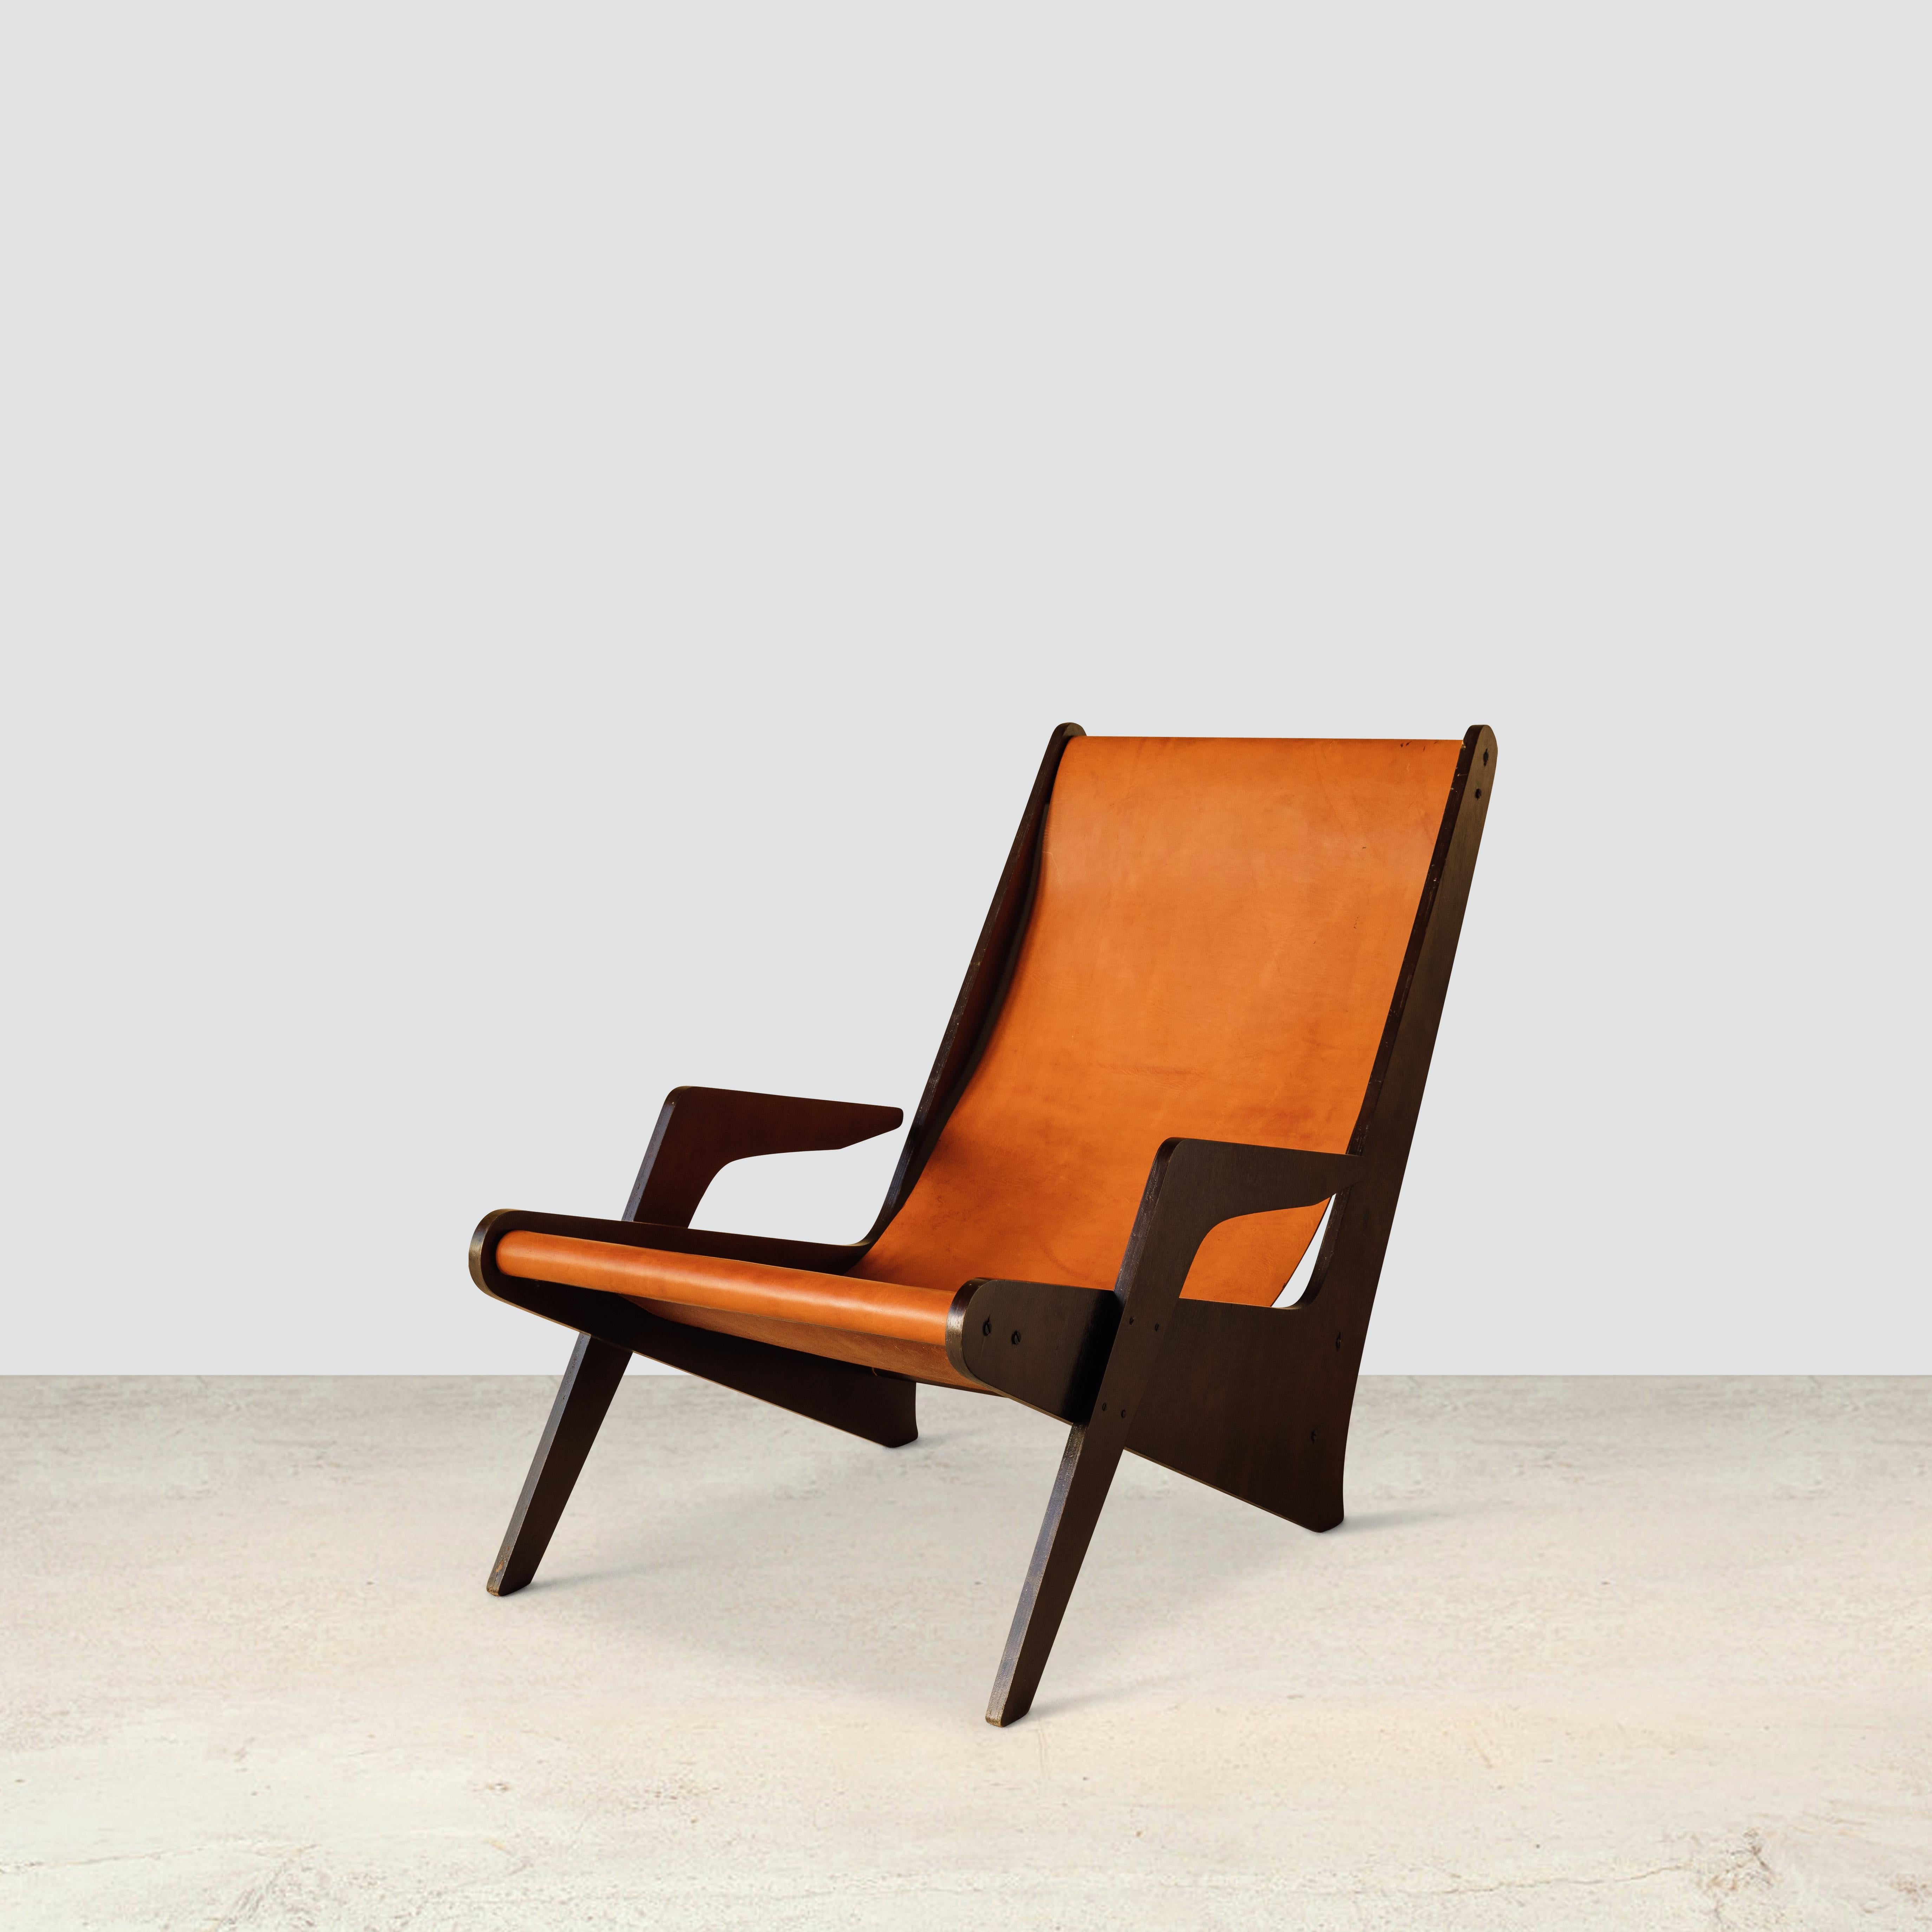 Boomerang lounge armchair
By Zanine Caldas 1950

Boomerang chair in rosewood and leather designed by Zanine Caldas and manufactured by Movies Artisticos Z. A Brazilian pioneer to the industrialization of the furniture manufacturing process, José